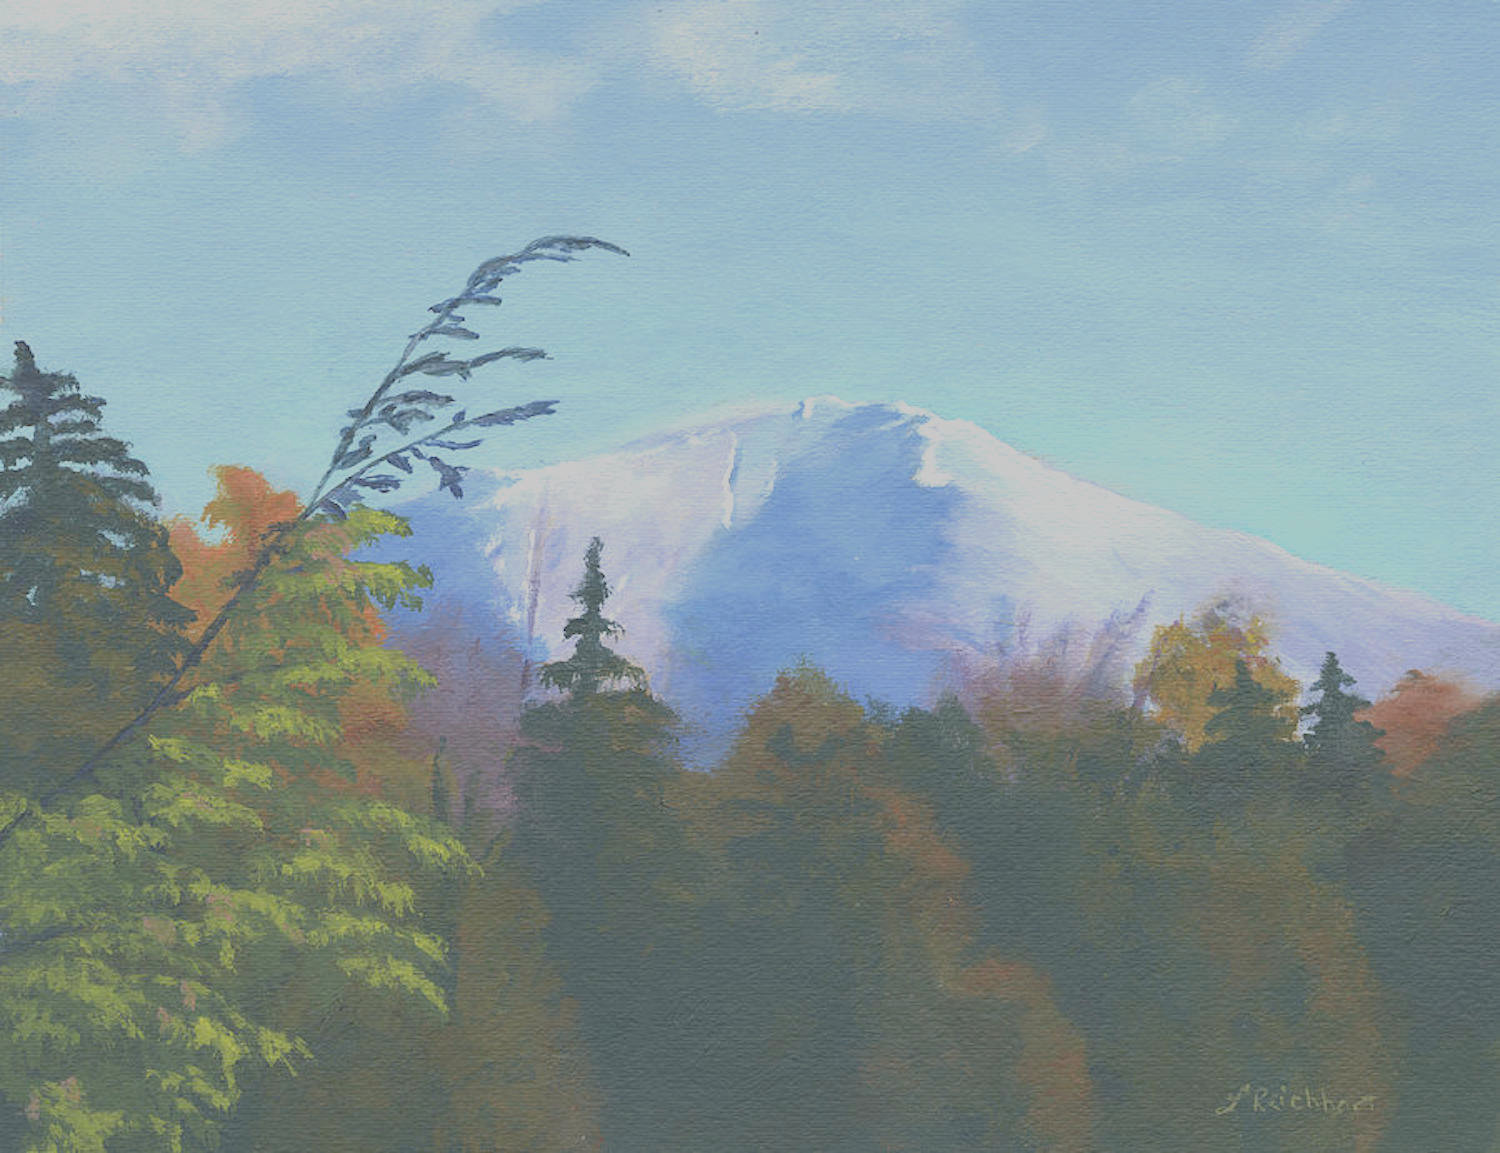 “Whiteface Mountain” by Lynne Reichhart